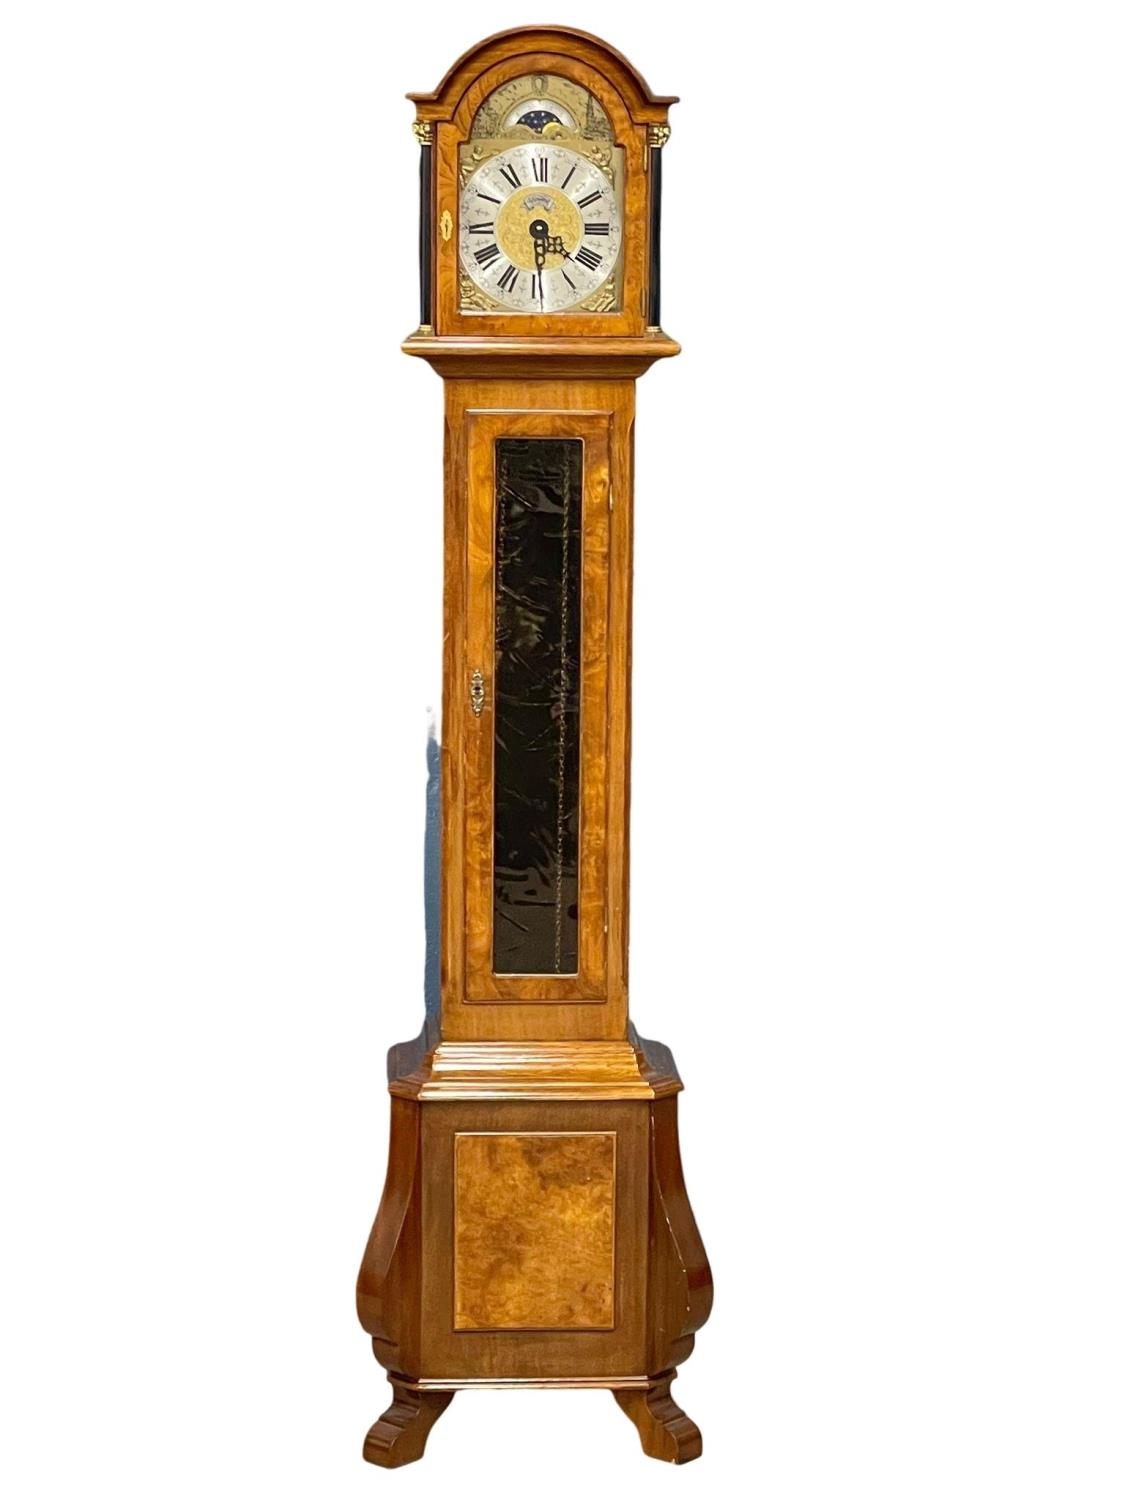 A mahogany and burr walnut long case clock with brass moon dial face. By Warmink. Weights and